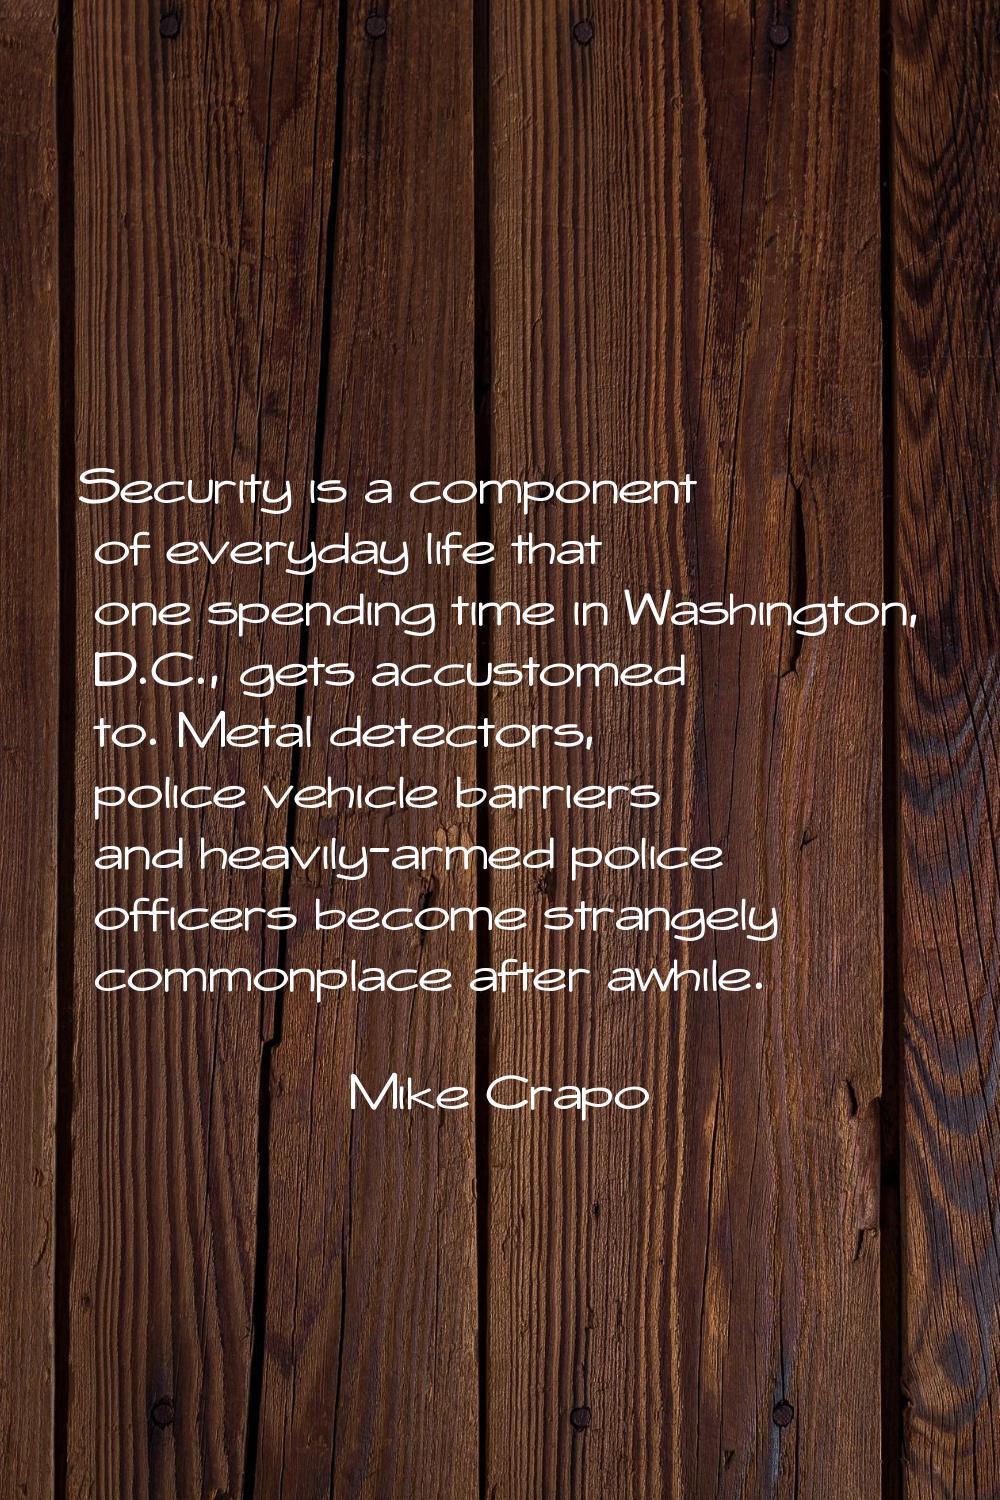 Security is a component of everyday life that one spending time in Washington, D.C., gets accustome